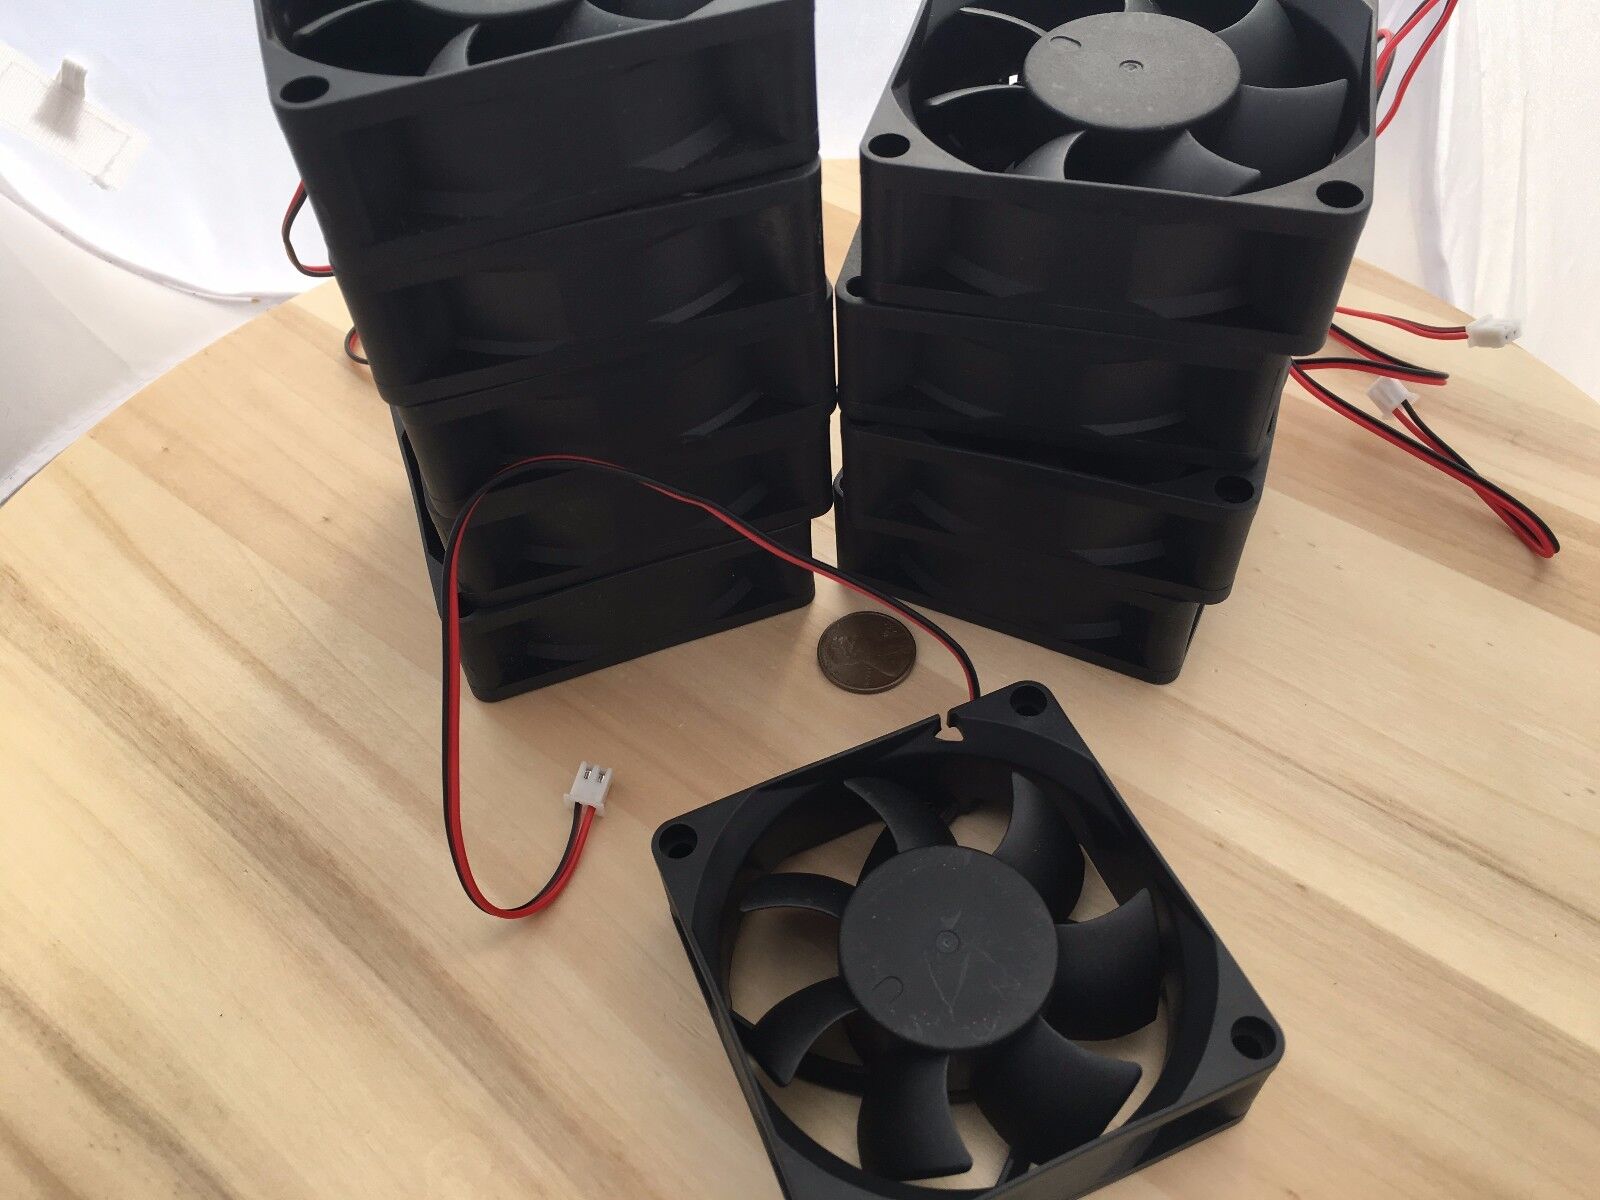 10 Pieces Gdstime 7025s 70x70x25mm 2 wires Brushless DC Cooling Fan 12V Fans